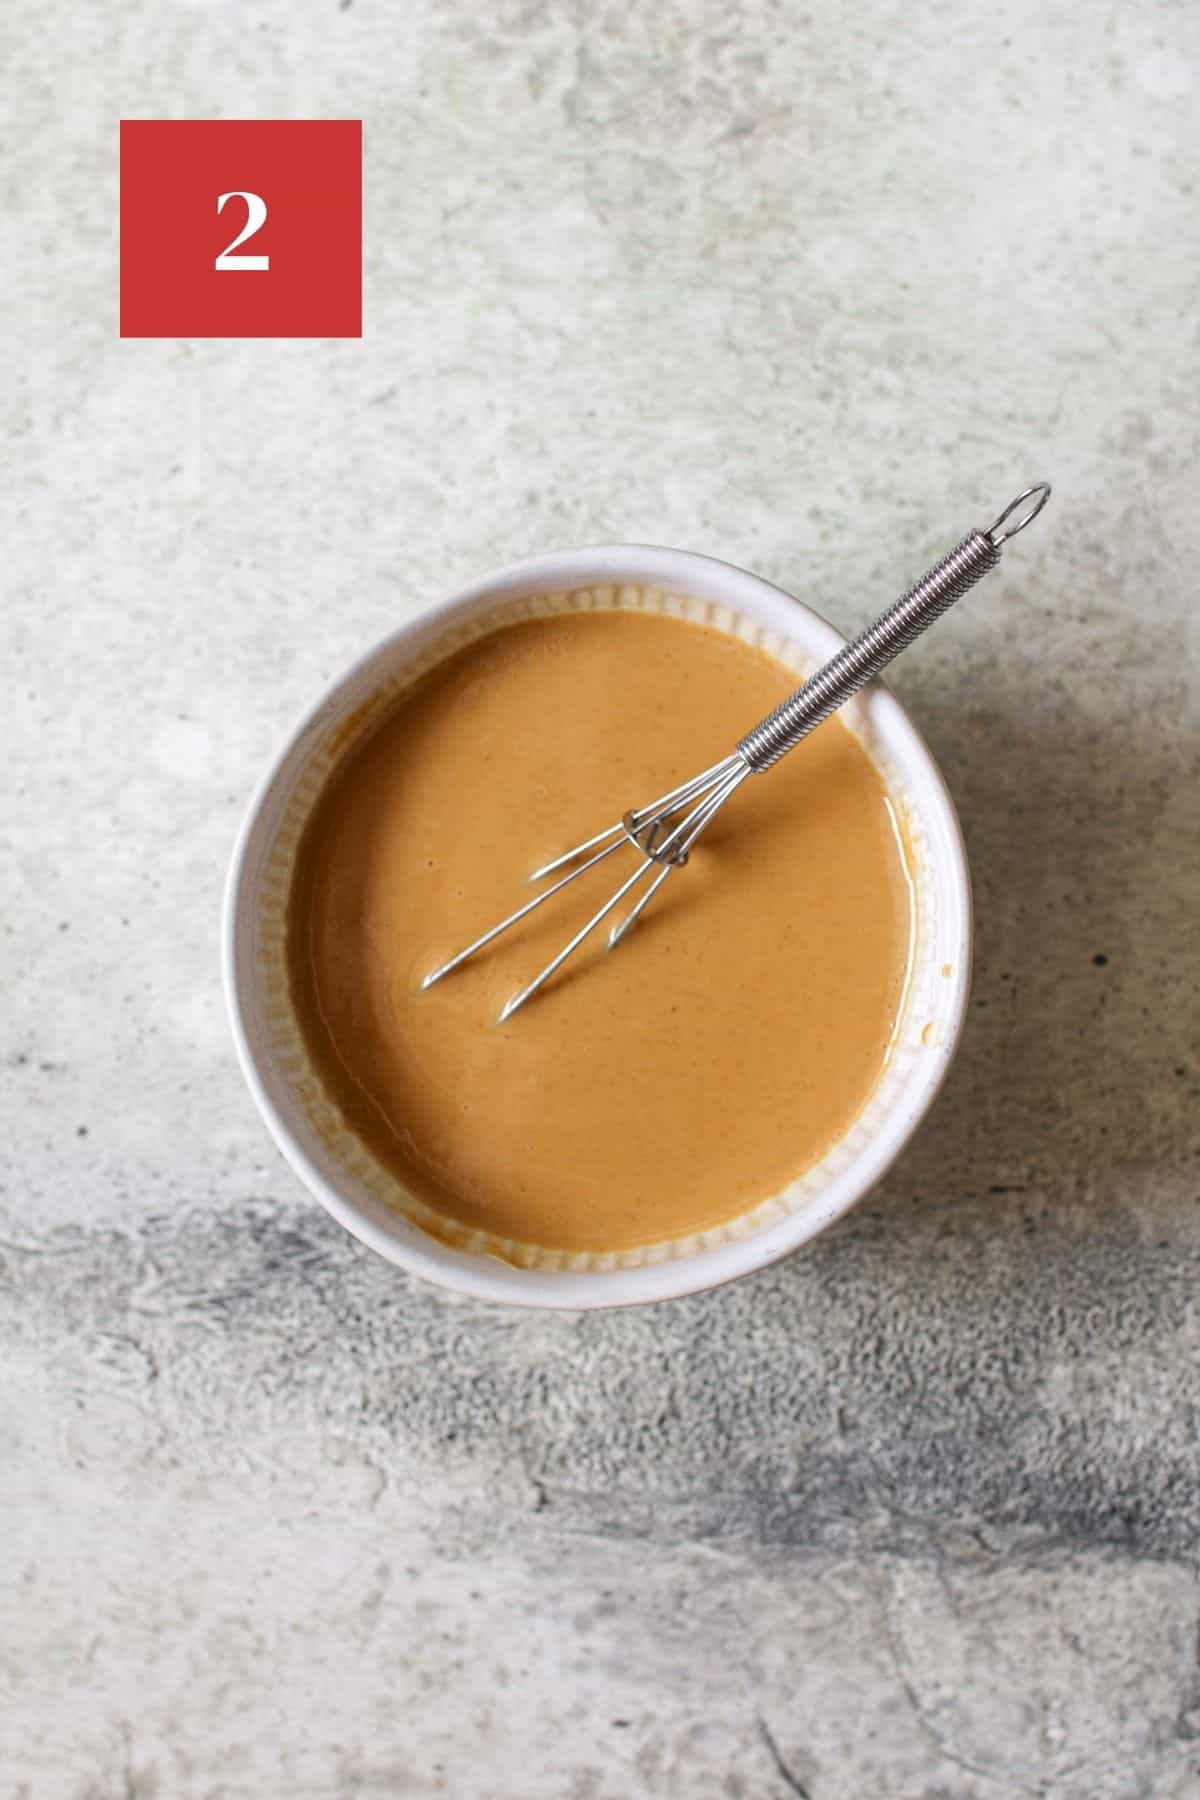 Melted peanut butter and coconut in a small bowl with a mini whisk on a cement background. In the upper left corner is a dark red square with a white '2' in the center.